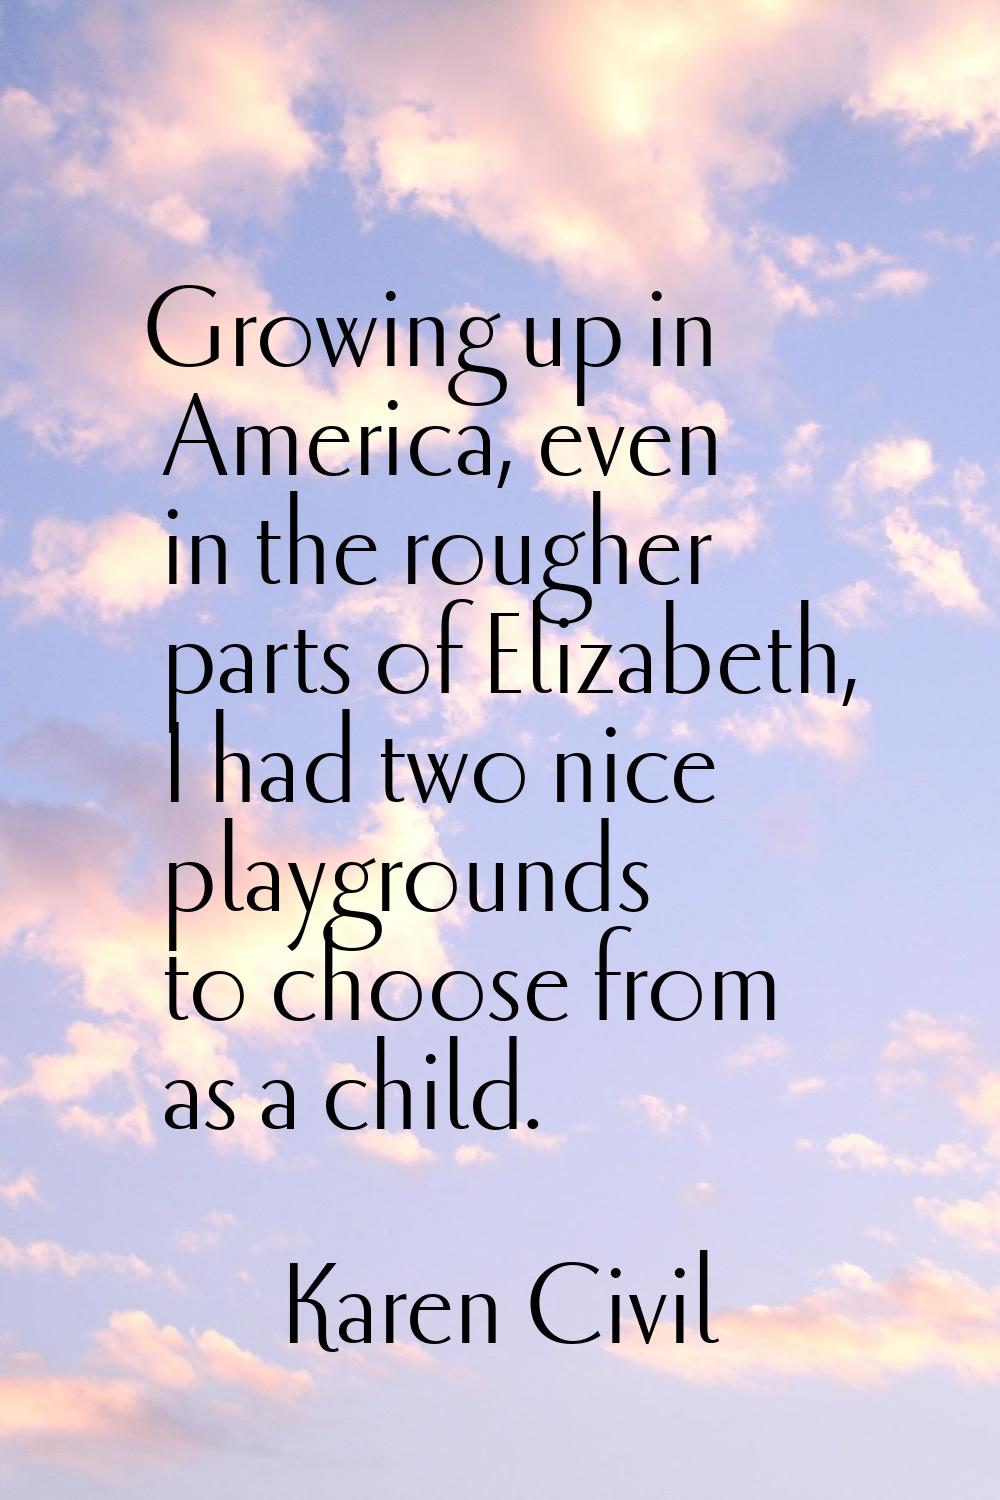 Growing up in America, even in the rougher parts of Elizabeth, I had two nice playgrounds to choose